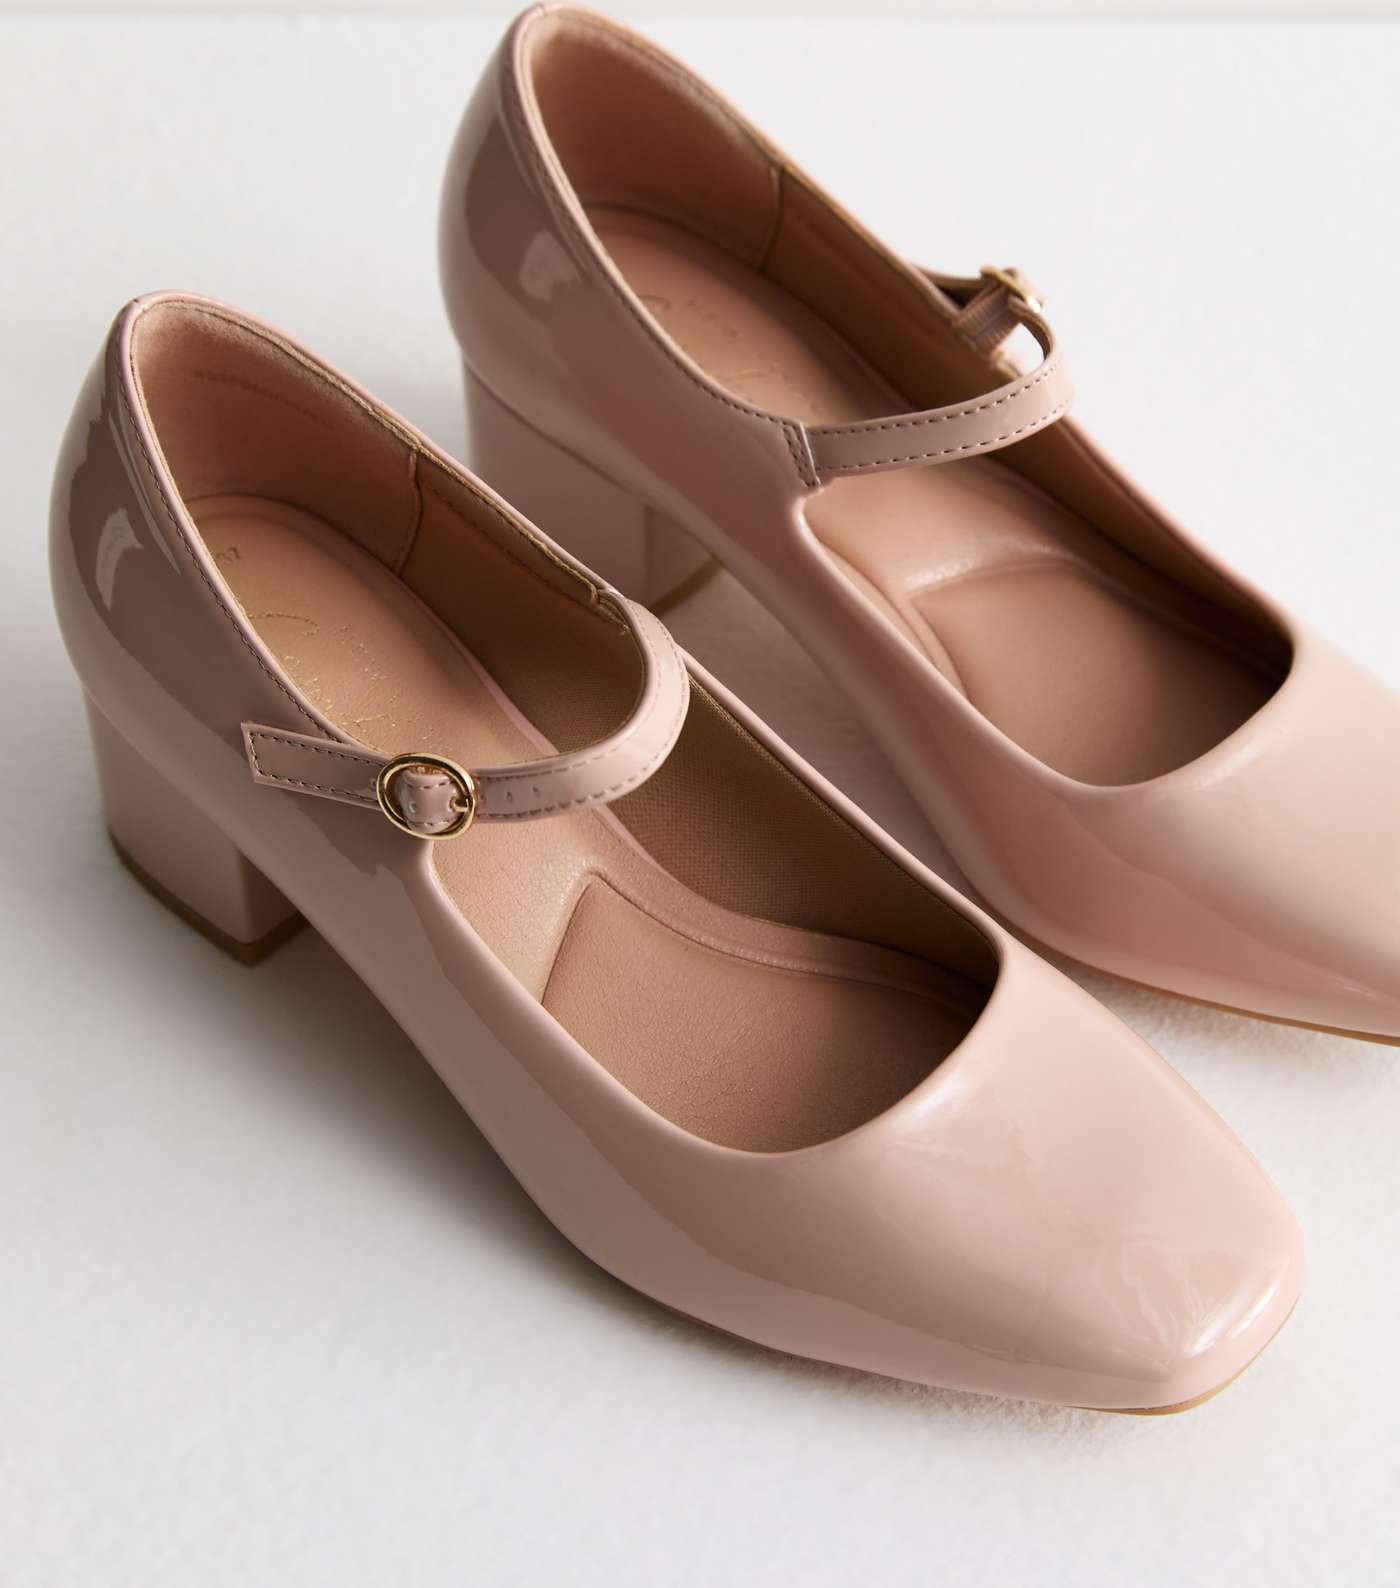 Pale Pink Patent Mary Jane Block Heel Court Shoes Image 3